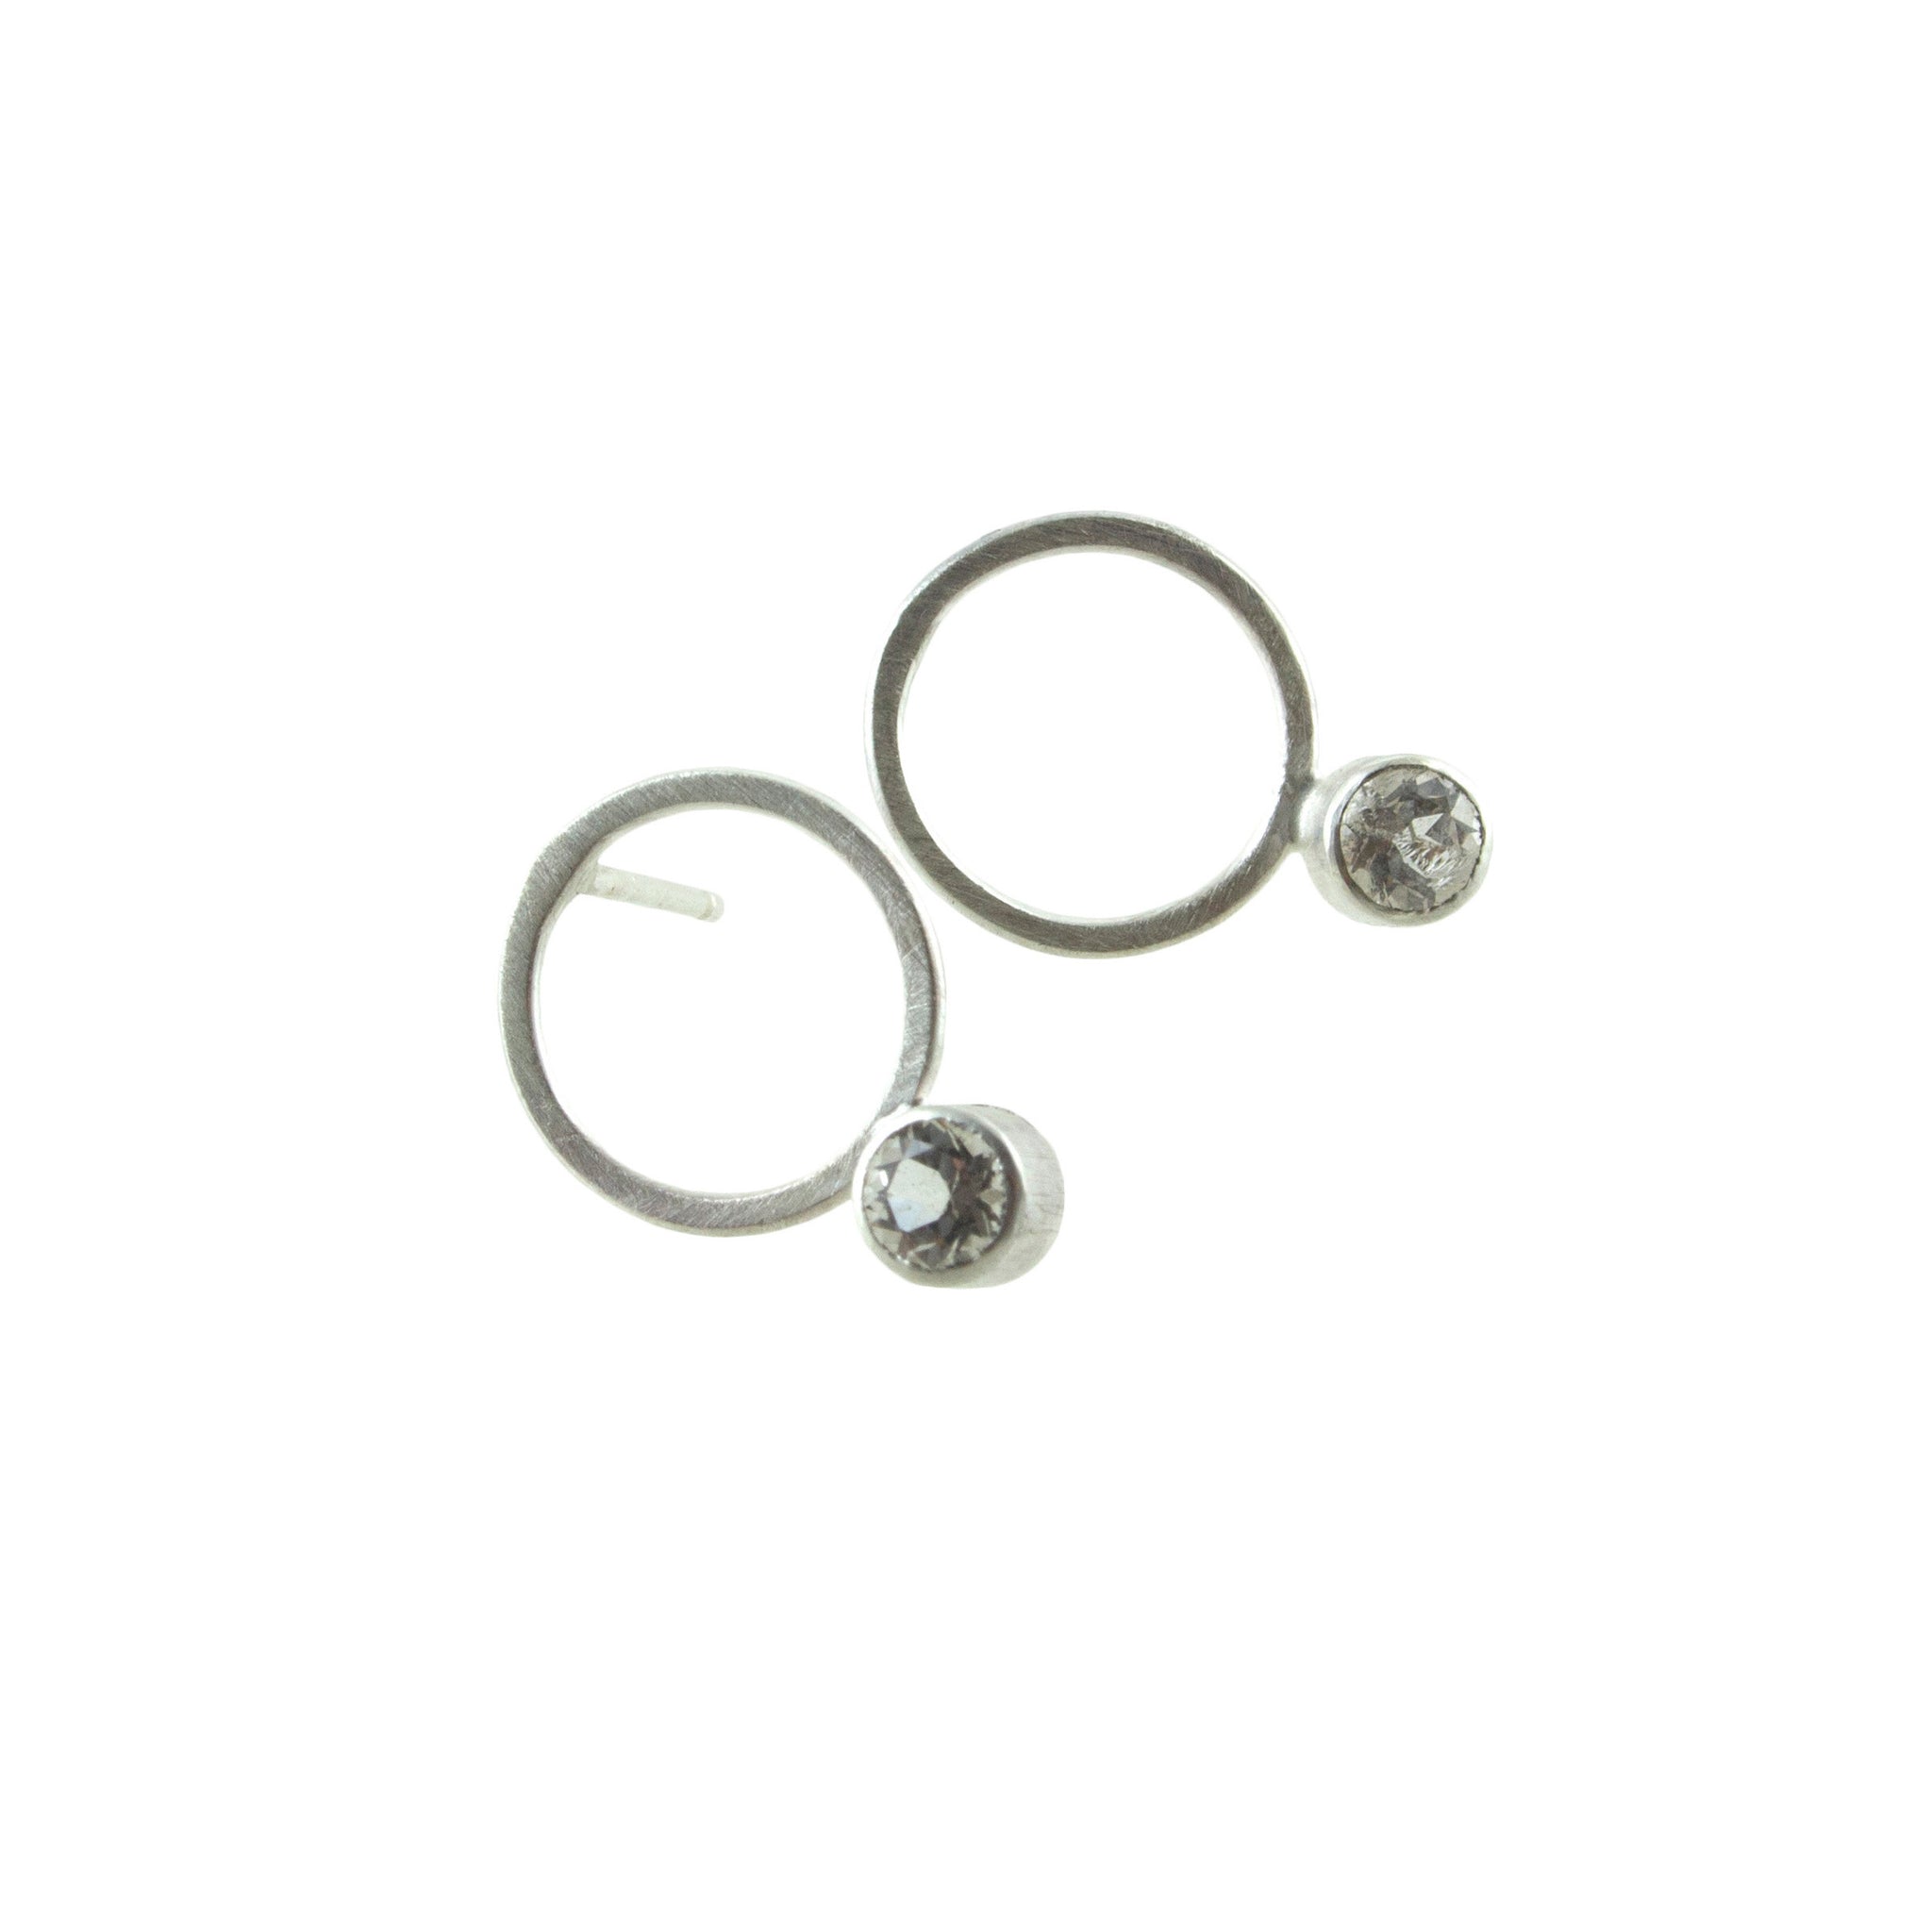 small sterling silver circle stud earrings with gemstones by eko jewelry design